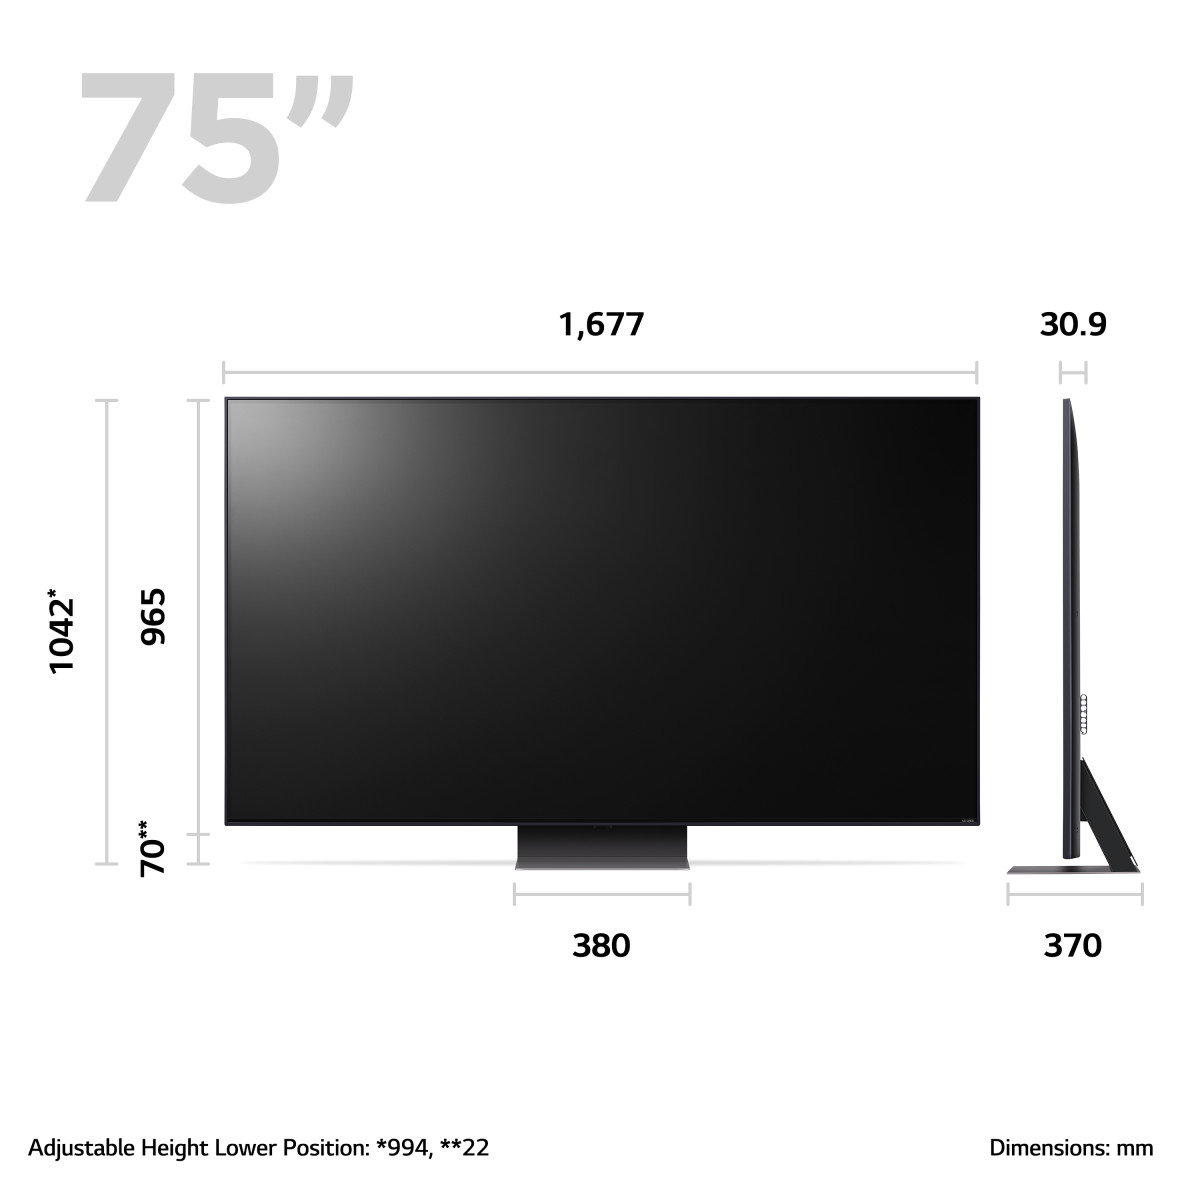 LG QNED QNED81 75 4K Smart TV